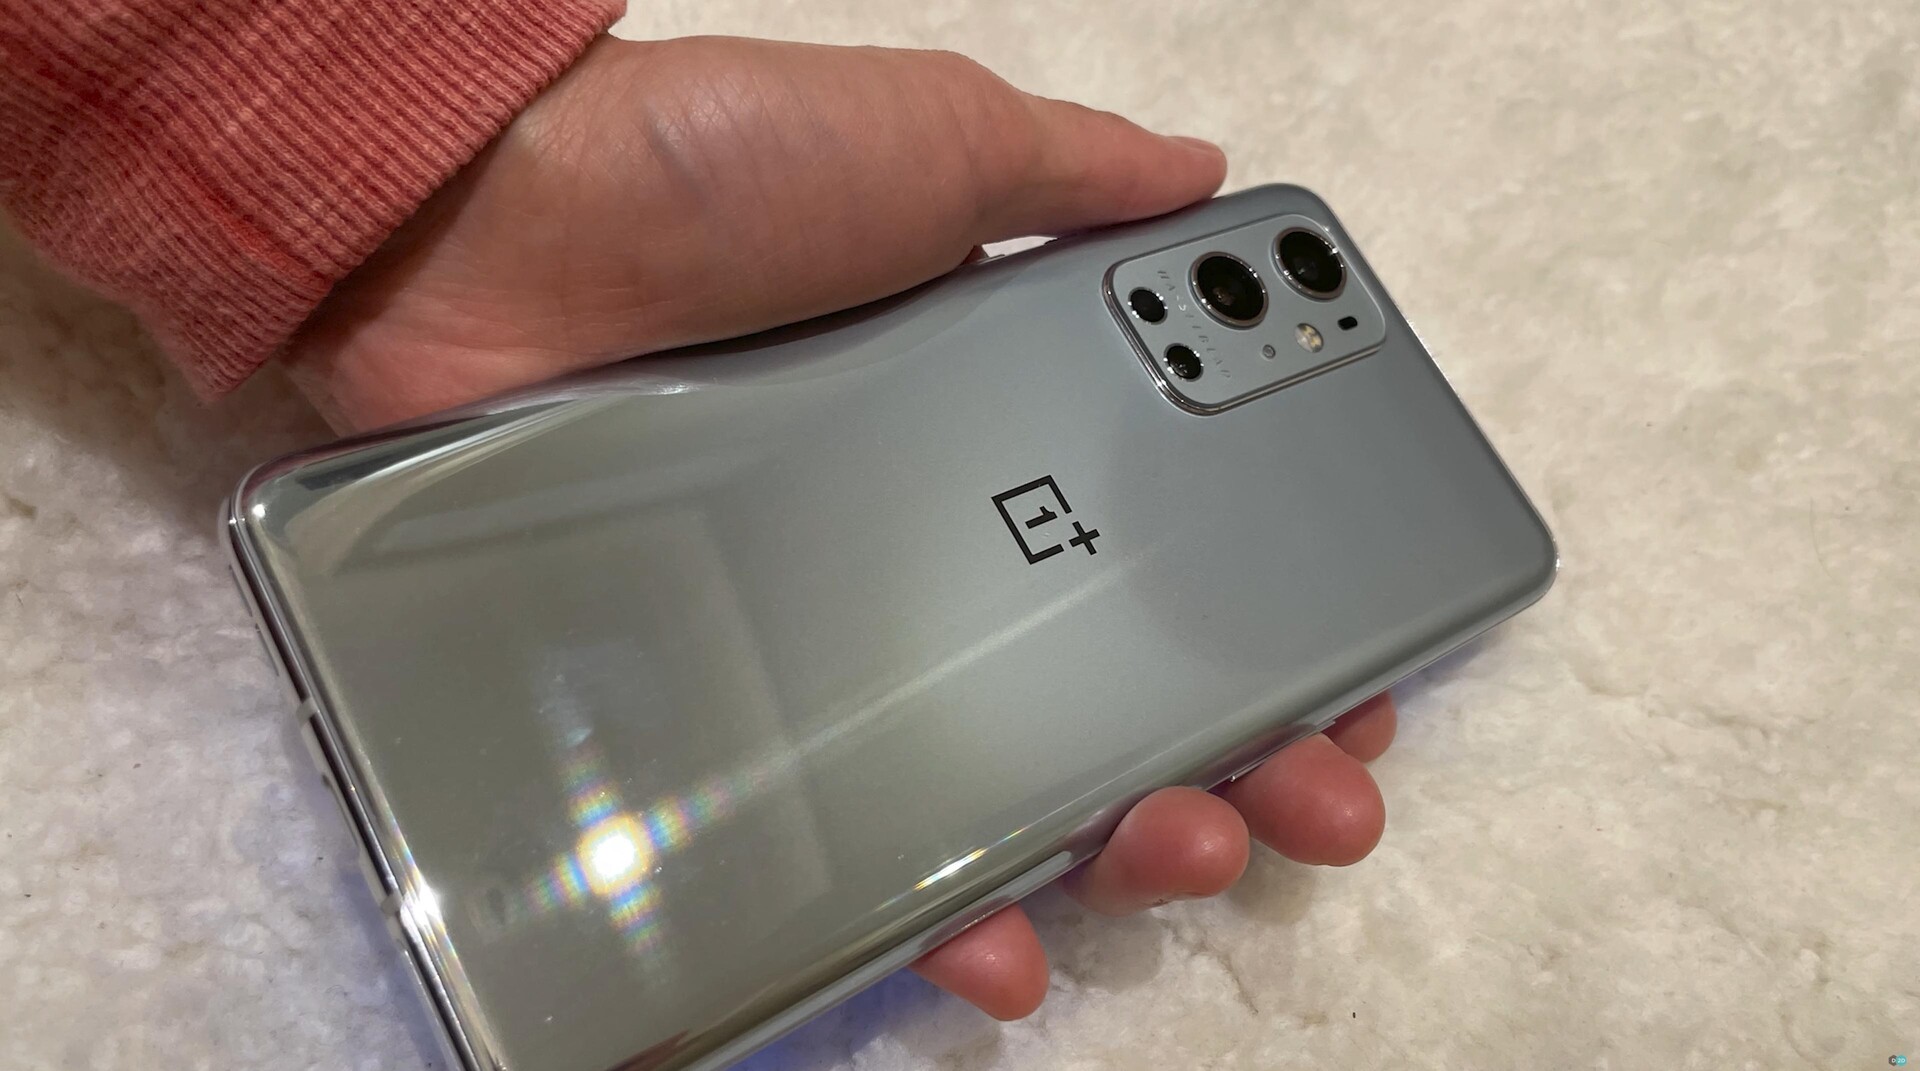 OnePlus 9 Pro leaks again with 4K and 120 FPS video recording capabilities and updated camera hardware;  OnePlus 9 series launch teasers to start soon